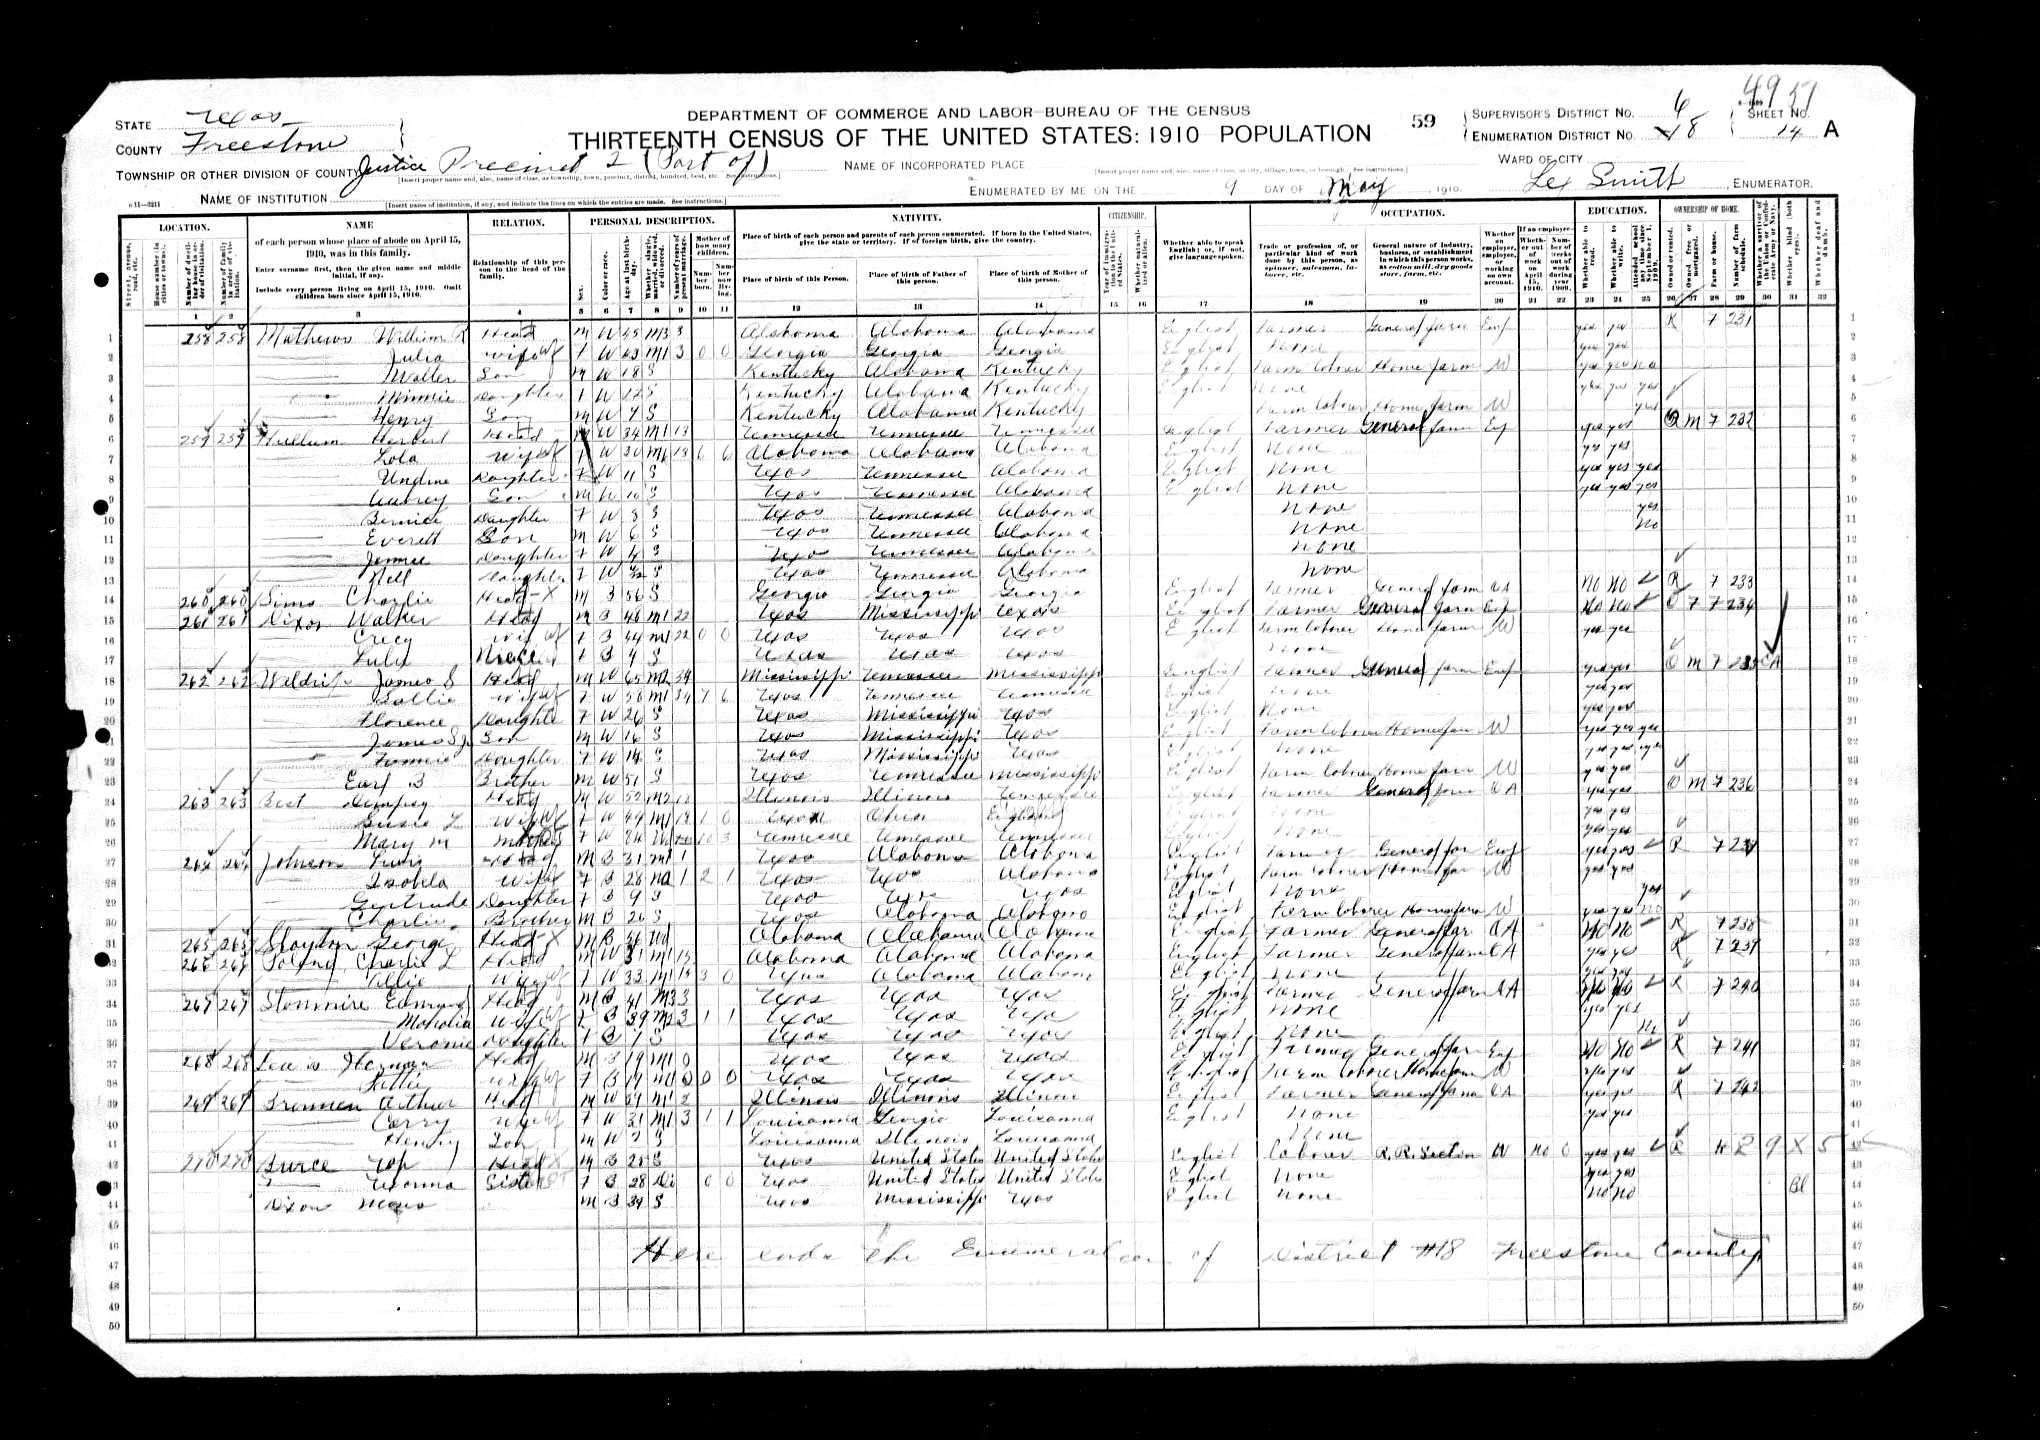 Mary M. (Walker) Best, 1910 Freestone County, Texas, census; daughter of Jacob Walker and Agnes McLean